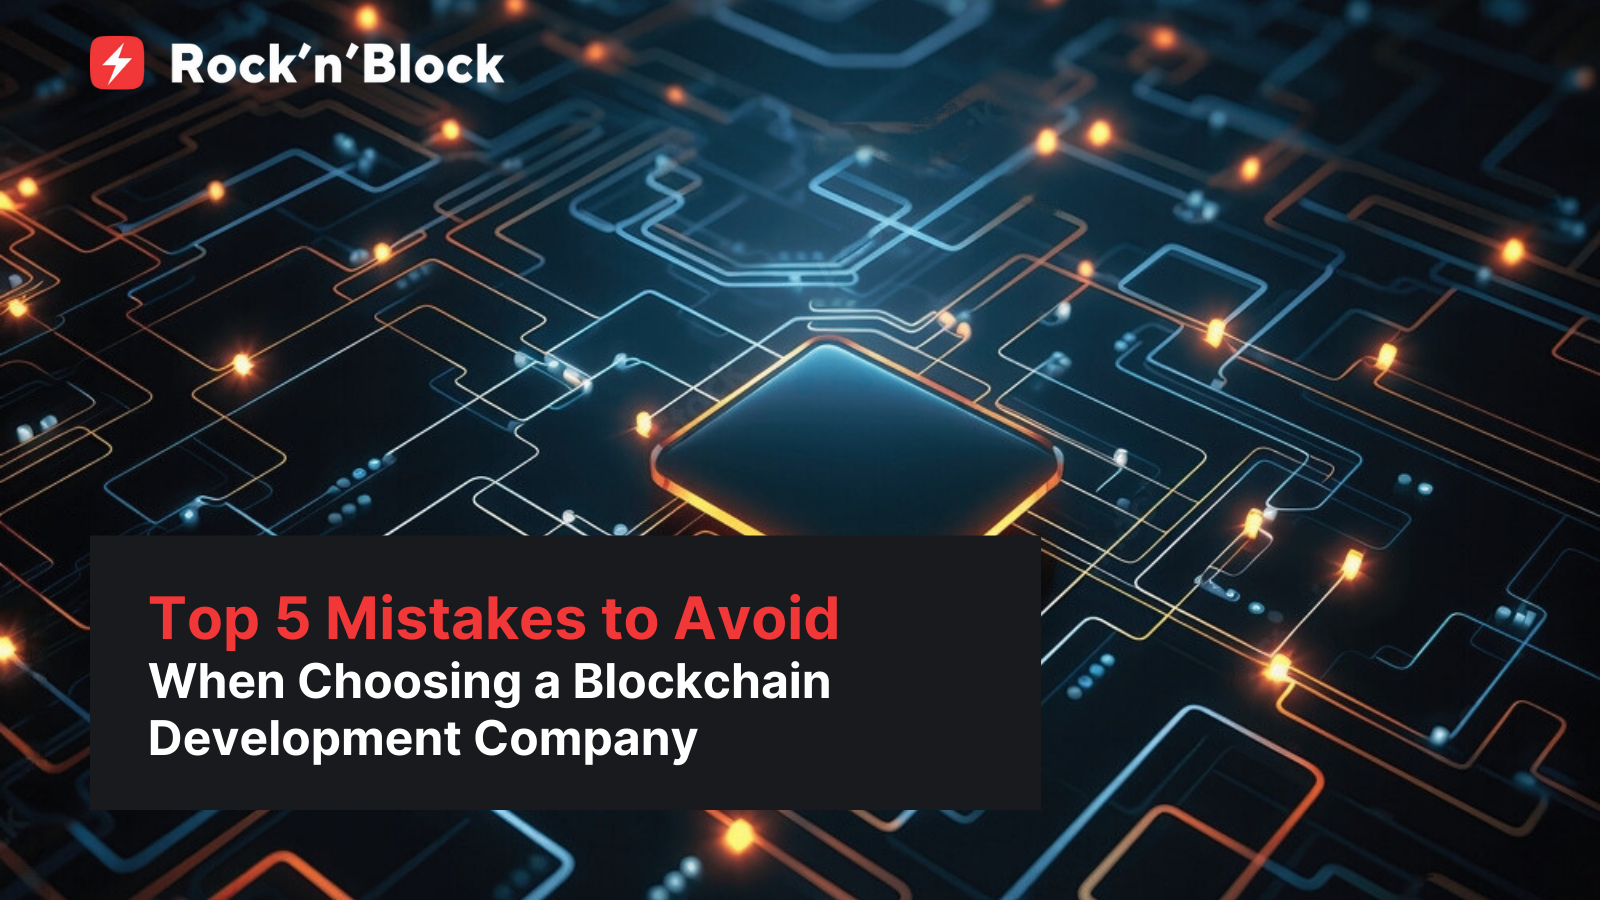 Hire Blockchain Developers Wisely: Top 5 Mistakes to Avoid